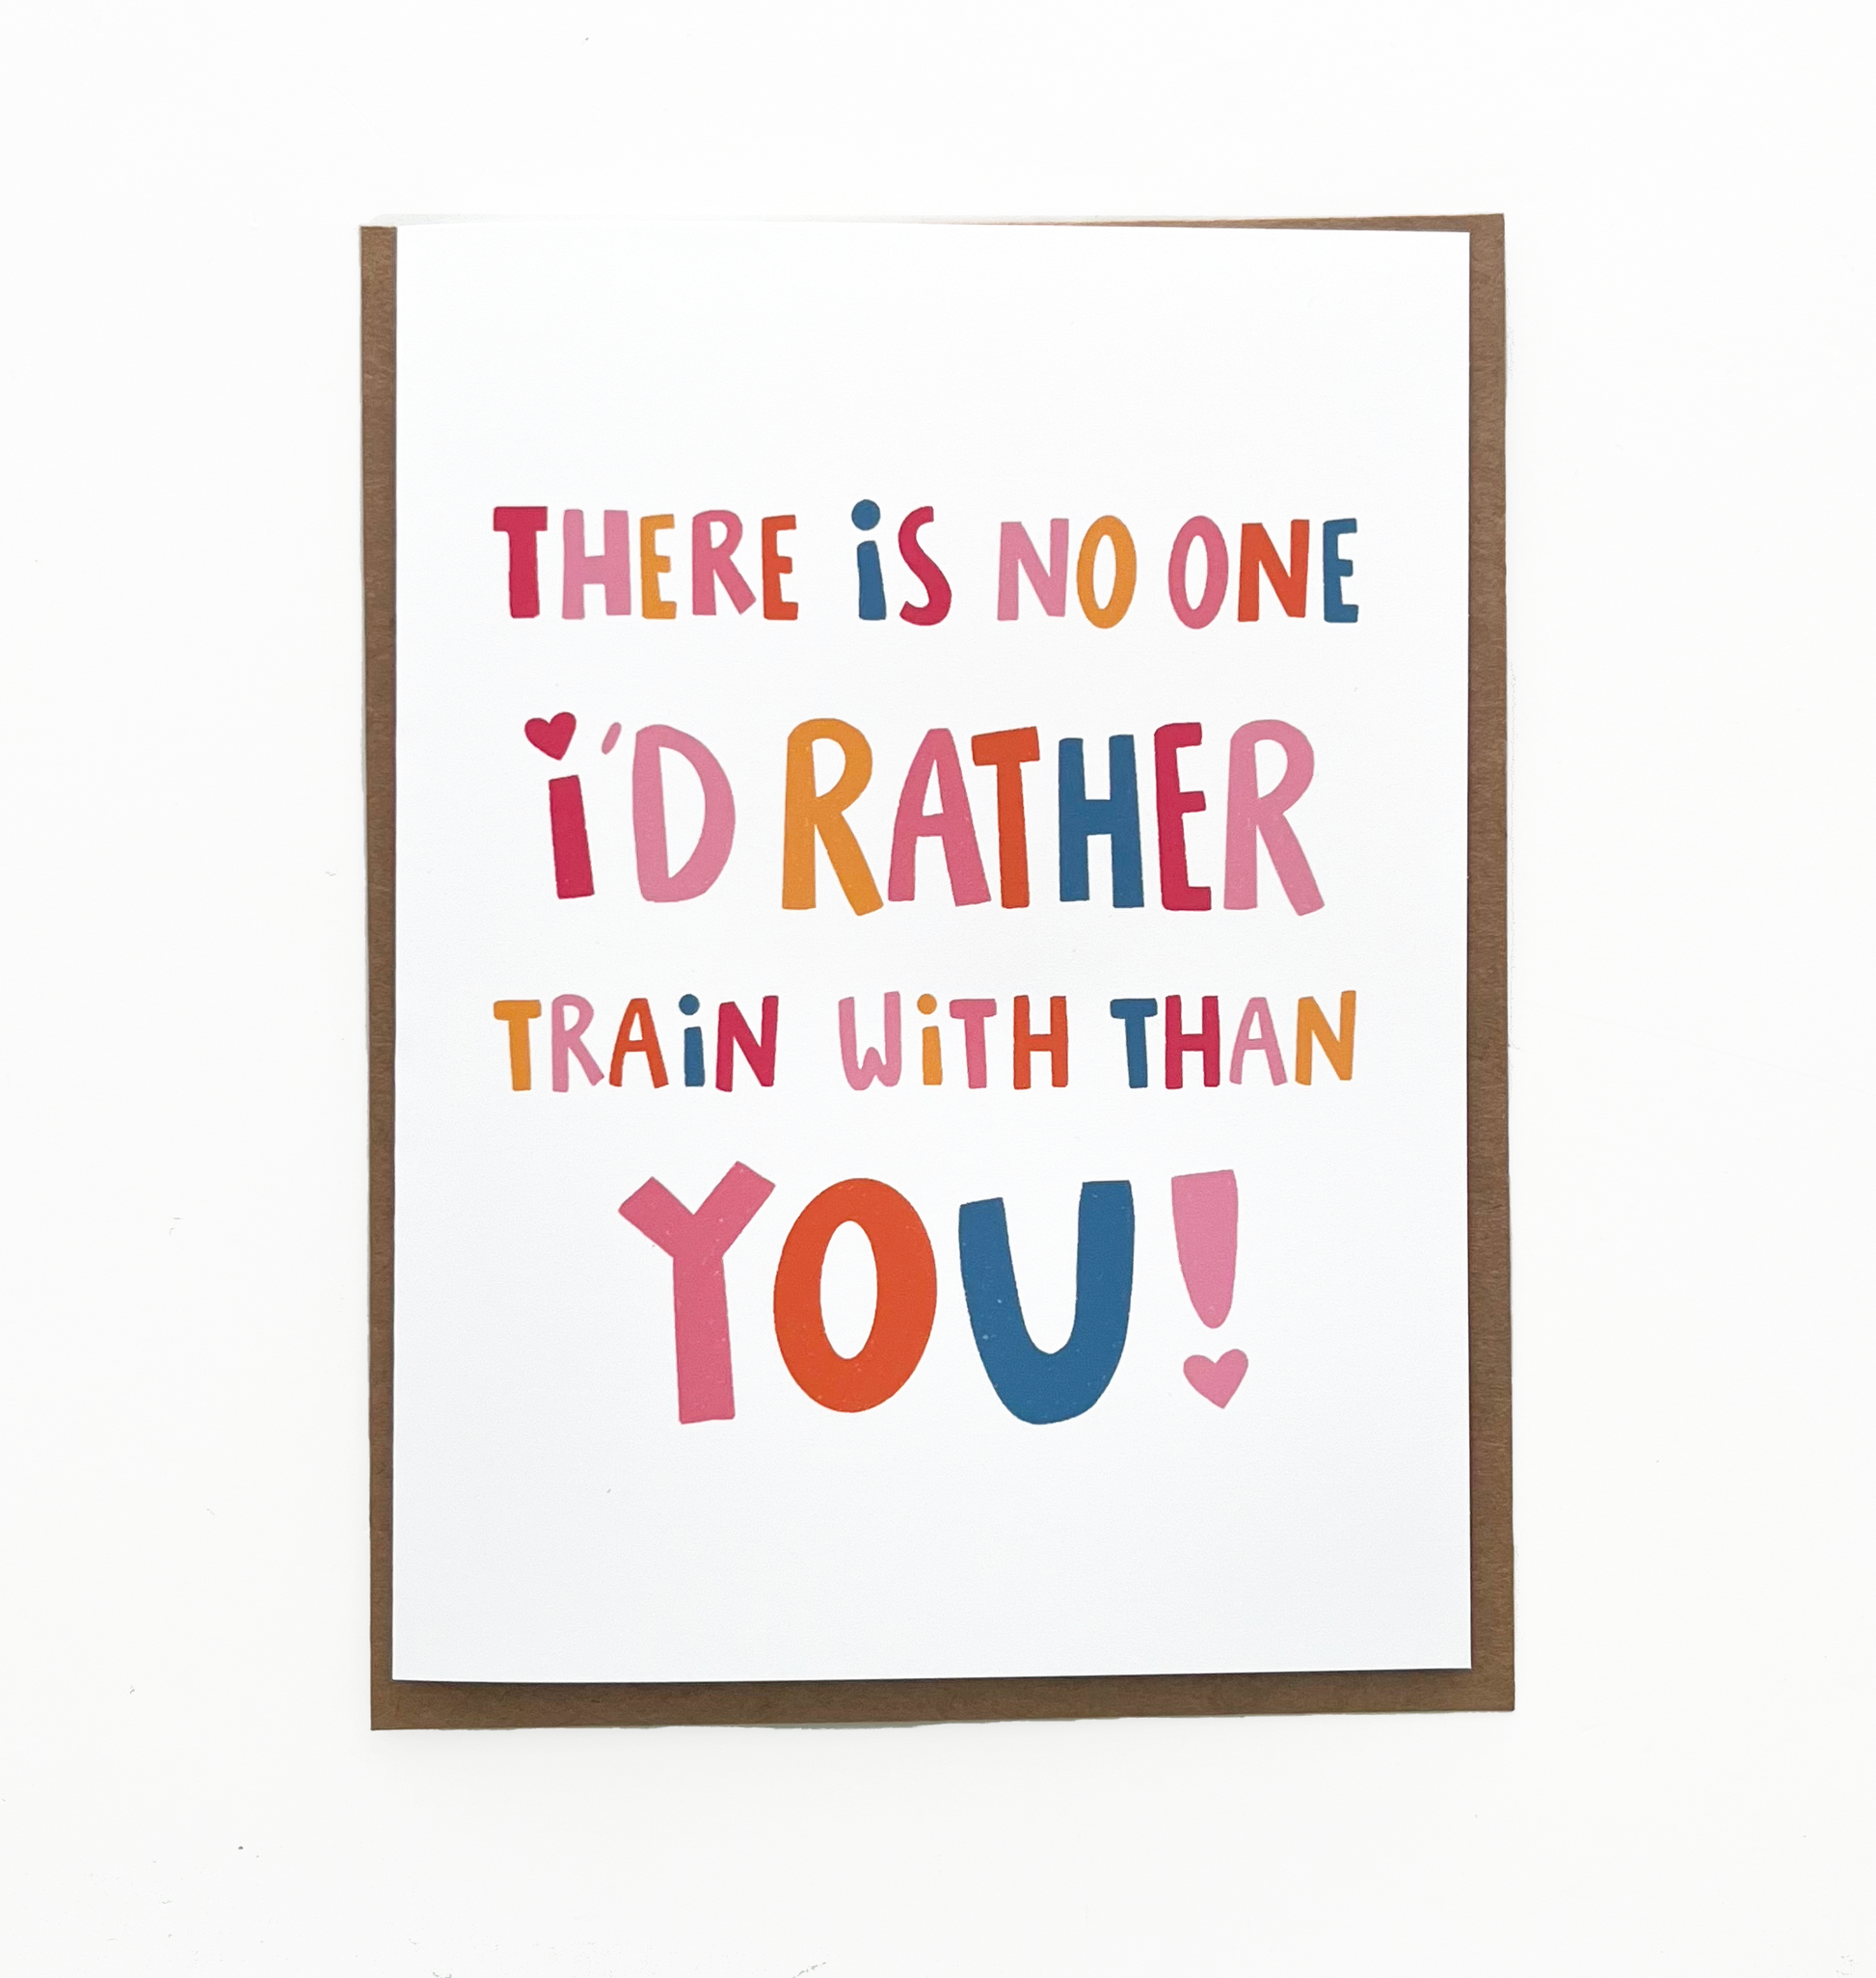 greeting card with colorful block text that says there is no one i'd rather train with than you